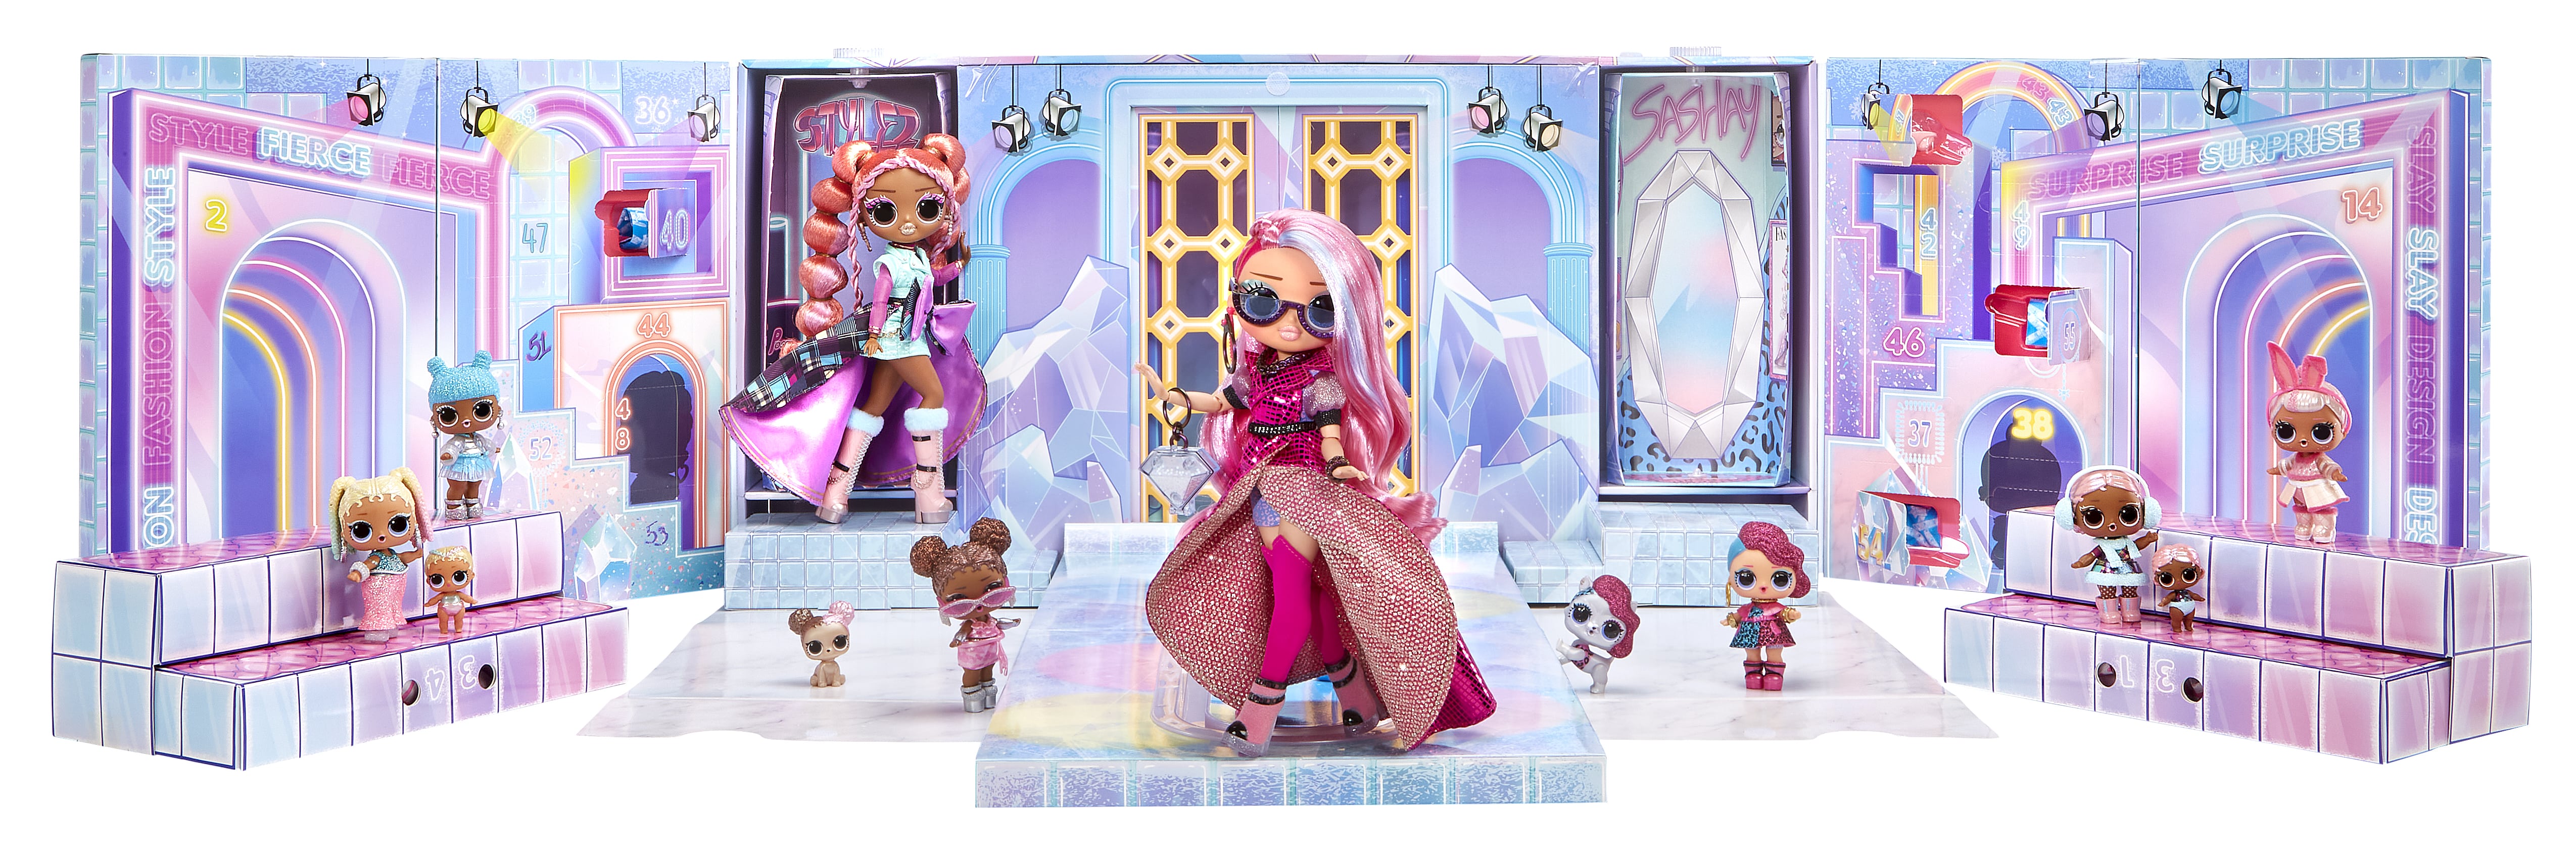 LOL Surprise Doll Fashion Show Mega Runway Playset with 80 Surprises, Ages 4 and up - image 1 of 7